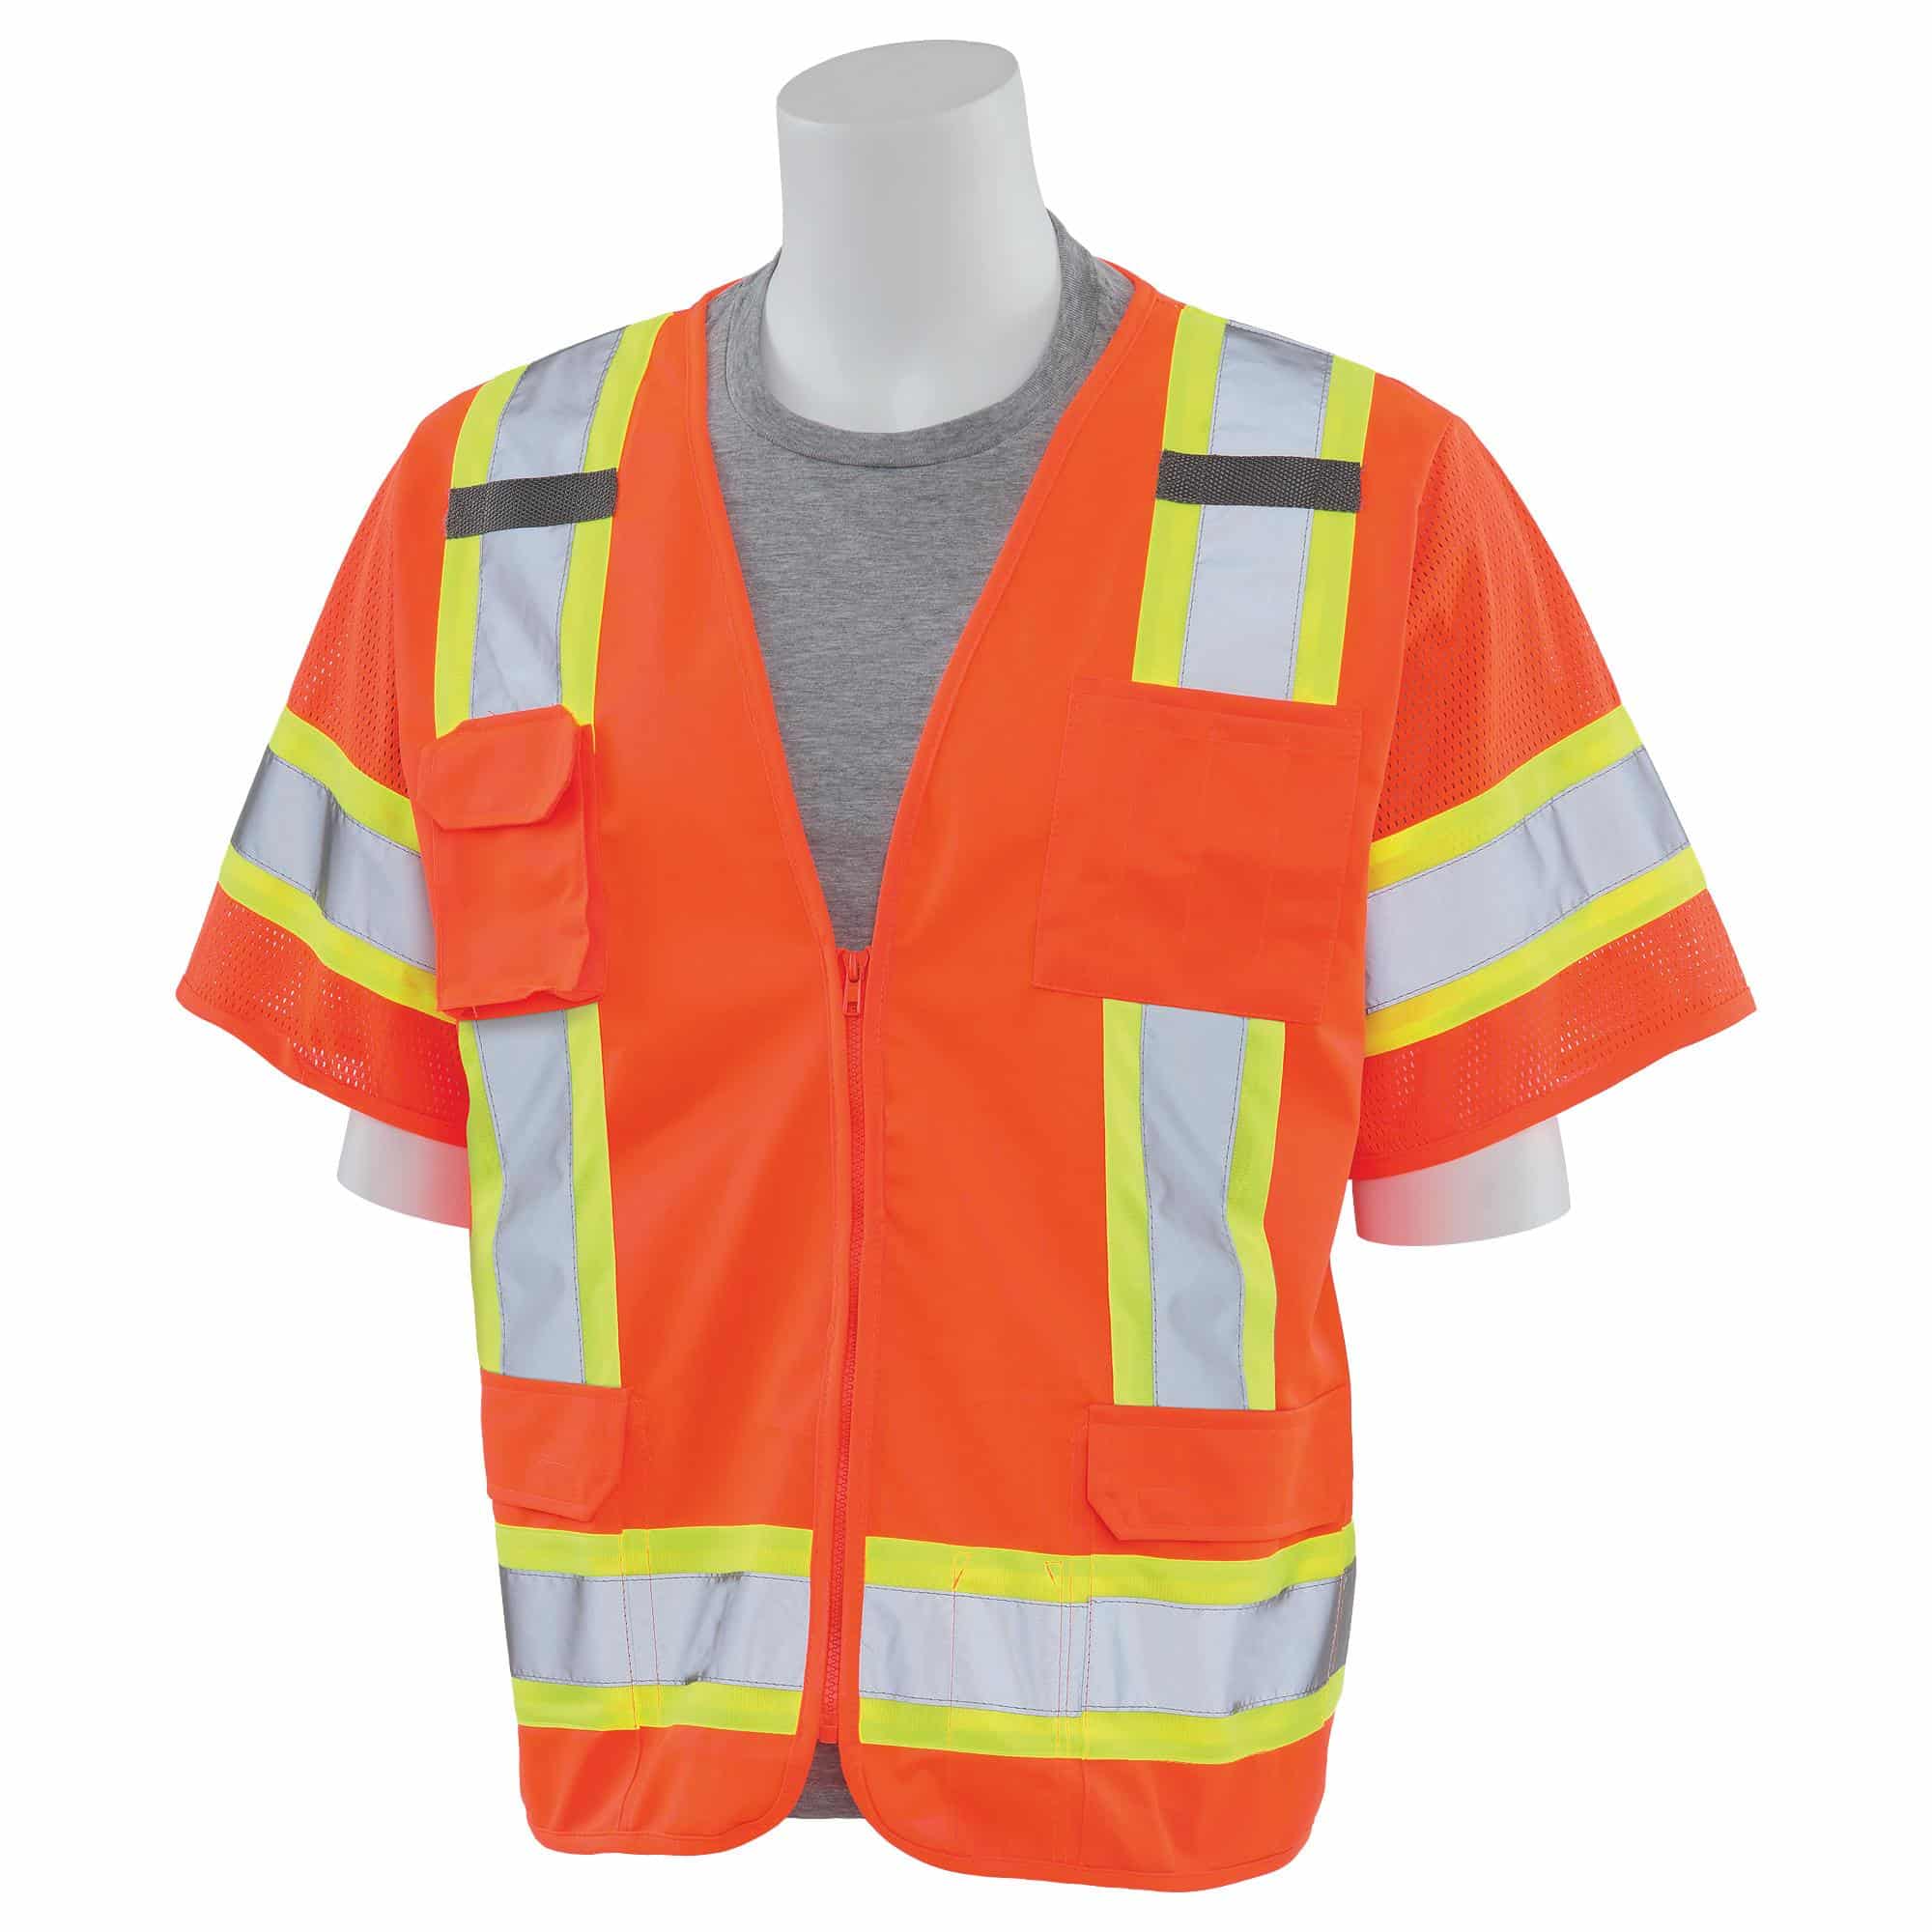 aware-wear-s680-class-3-solid-front-mesh-back-surveyor-s-ansi-rated